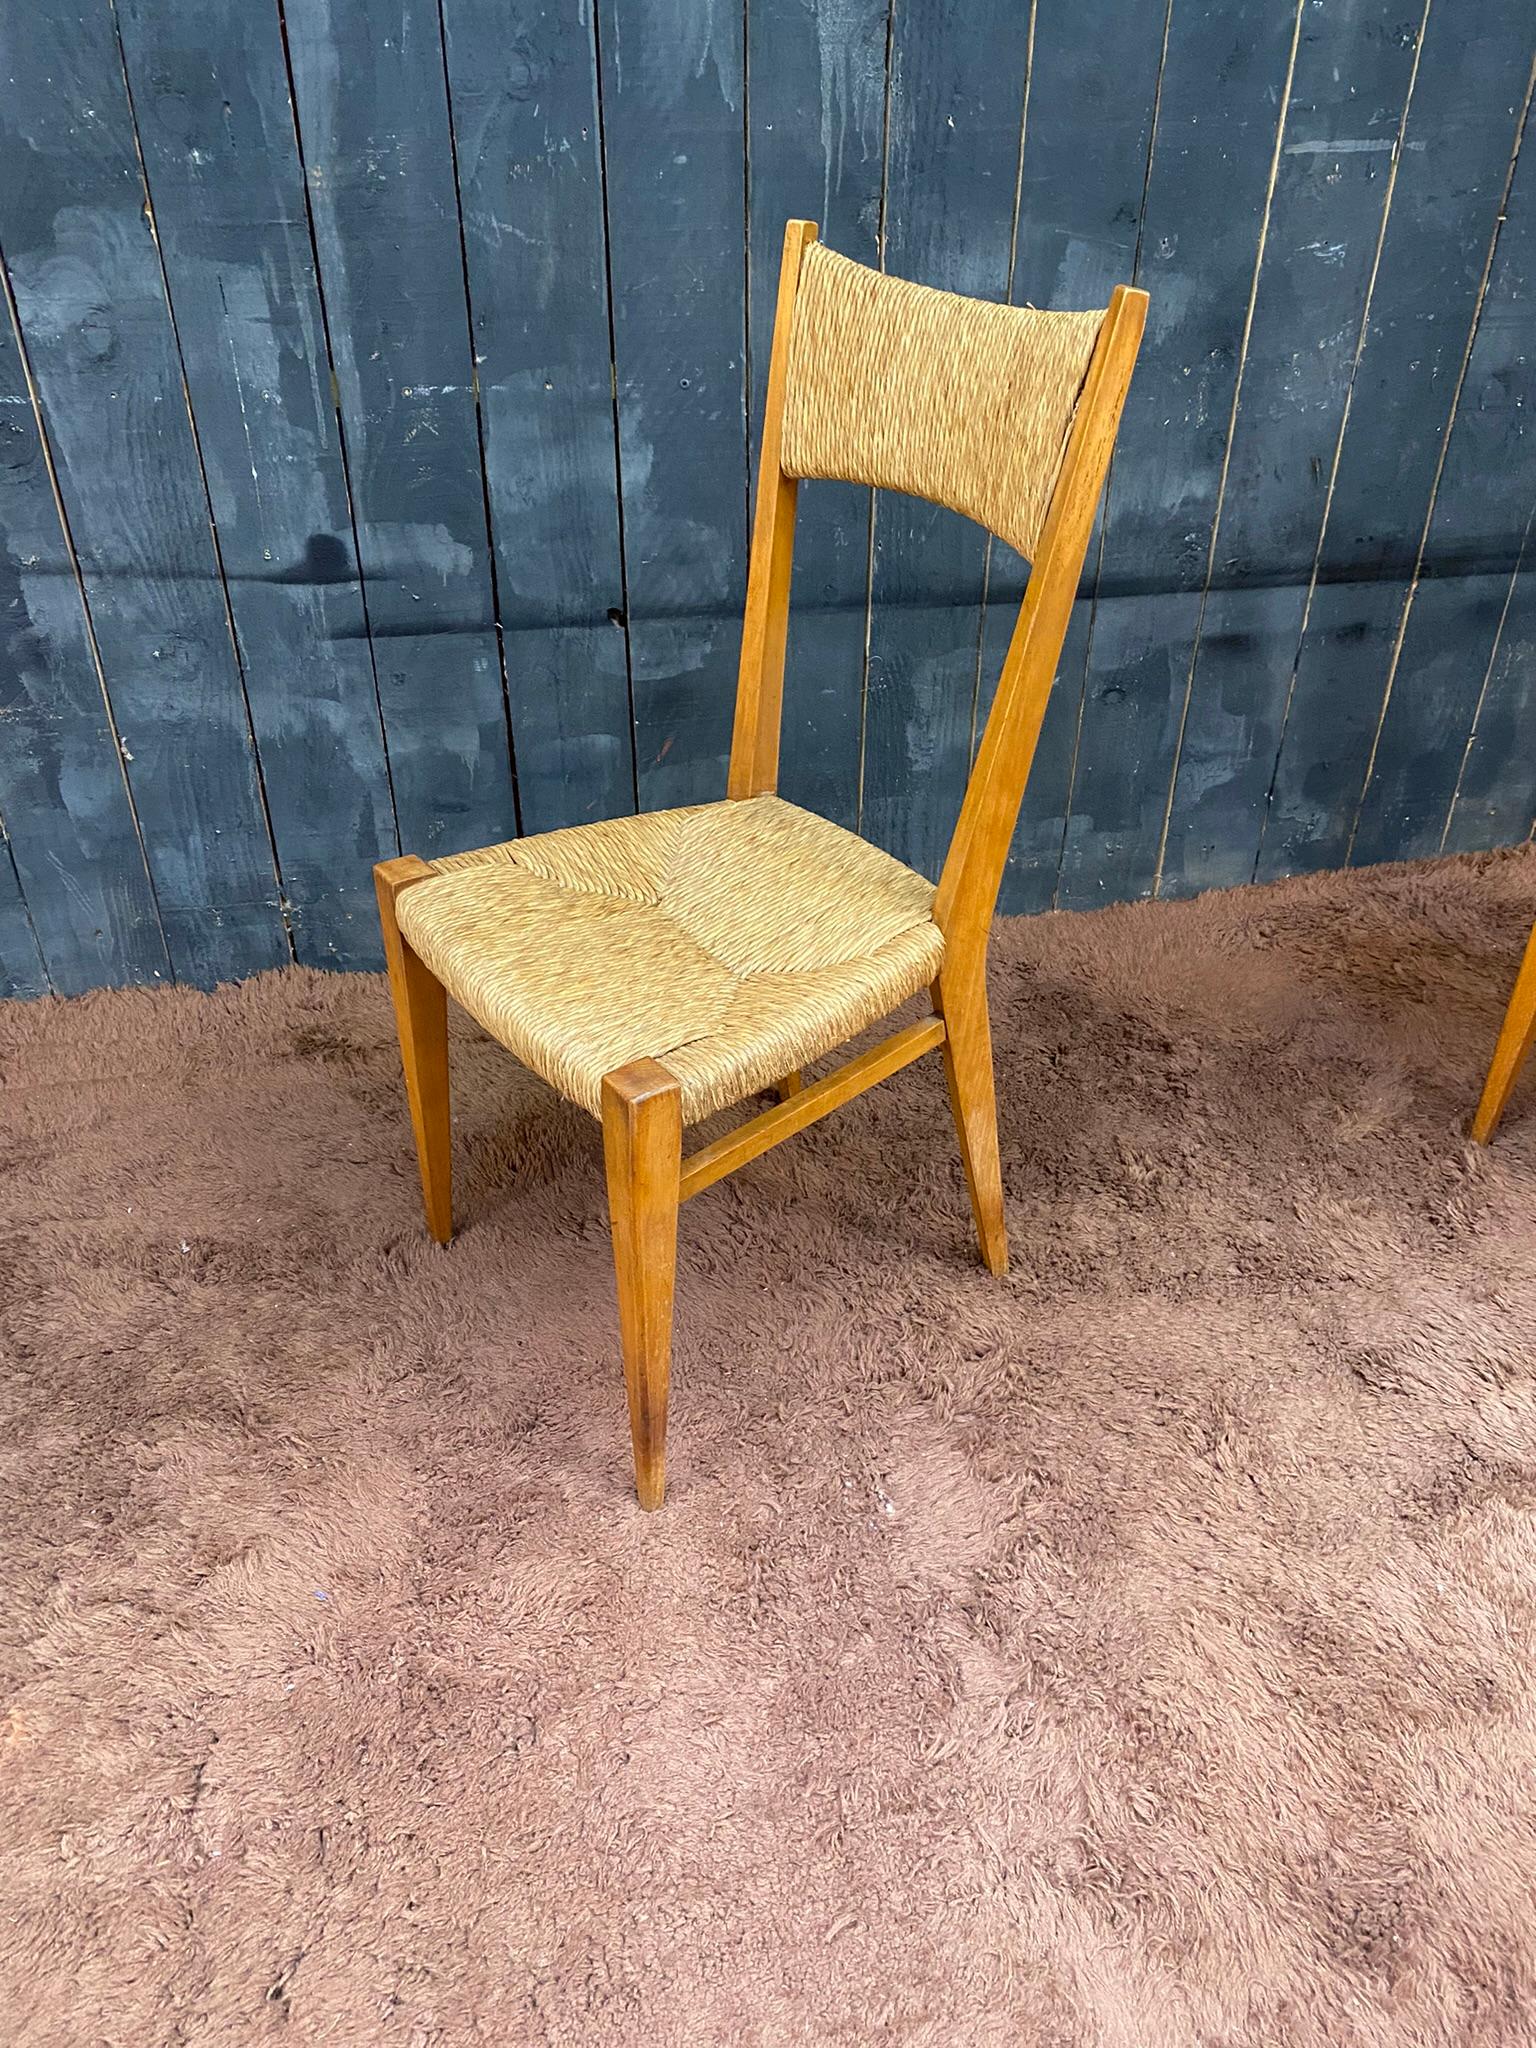 Series of 6 Elegant Oak Chairs, French Reconstruction Period, circa 1950 For Sale 11